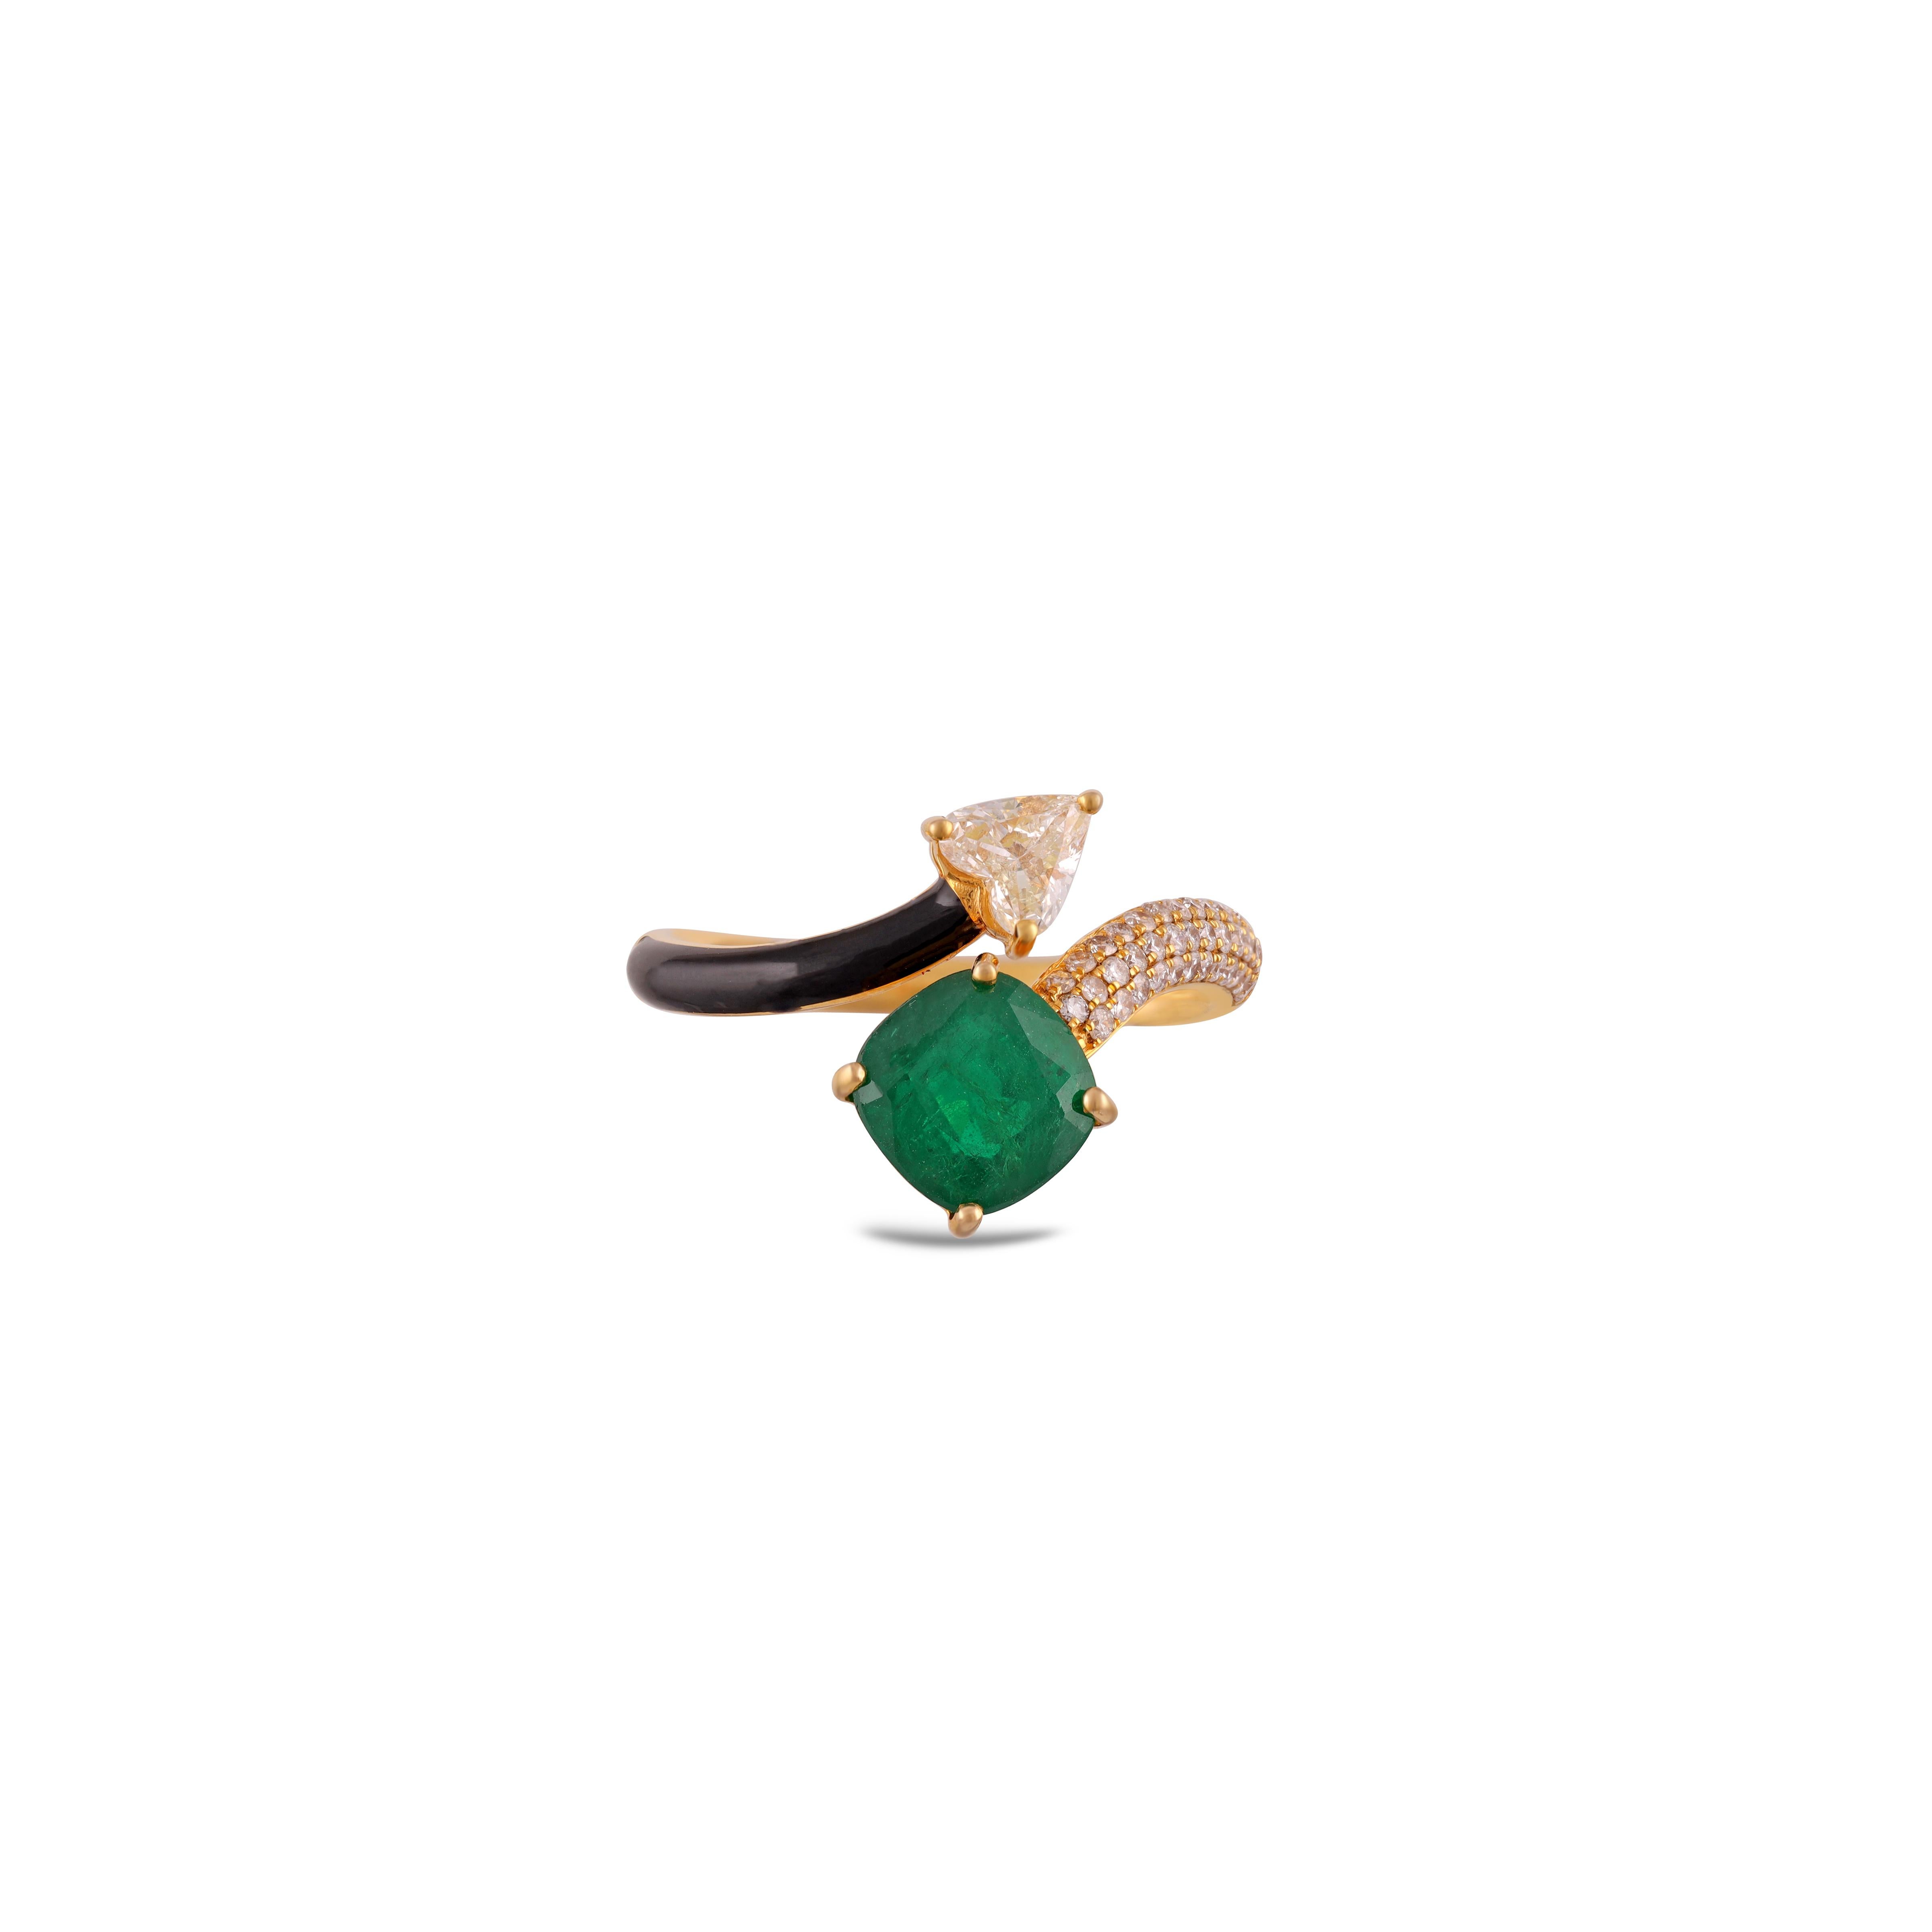 1.45 Carat Clear Zambian Emerald & Diamond Ring with Enamel & 18K Gold with 1 piece of  Zambian emerald weight 1.45 carat which is surrounded by diamonds weight 0.48 carat, this entire ring studded in 18k  gold.


 Ring size can be change as per the